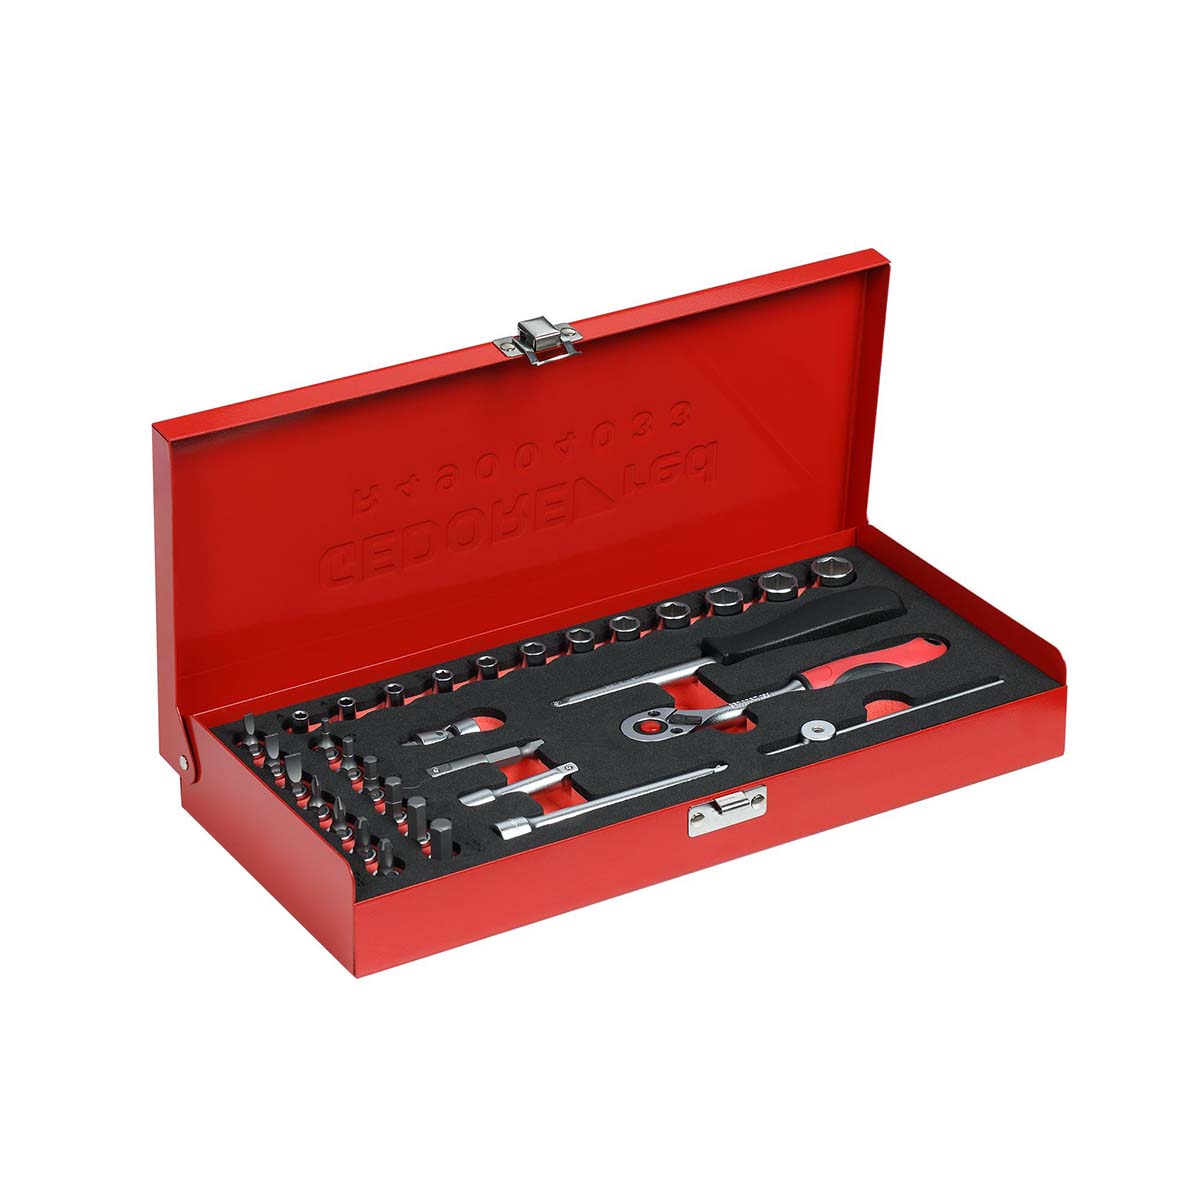 GEDORE red R49004033 - 1/4" socket set, 4-13 mm, 33 pieces (3300000)